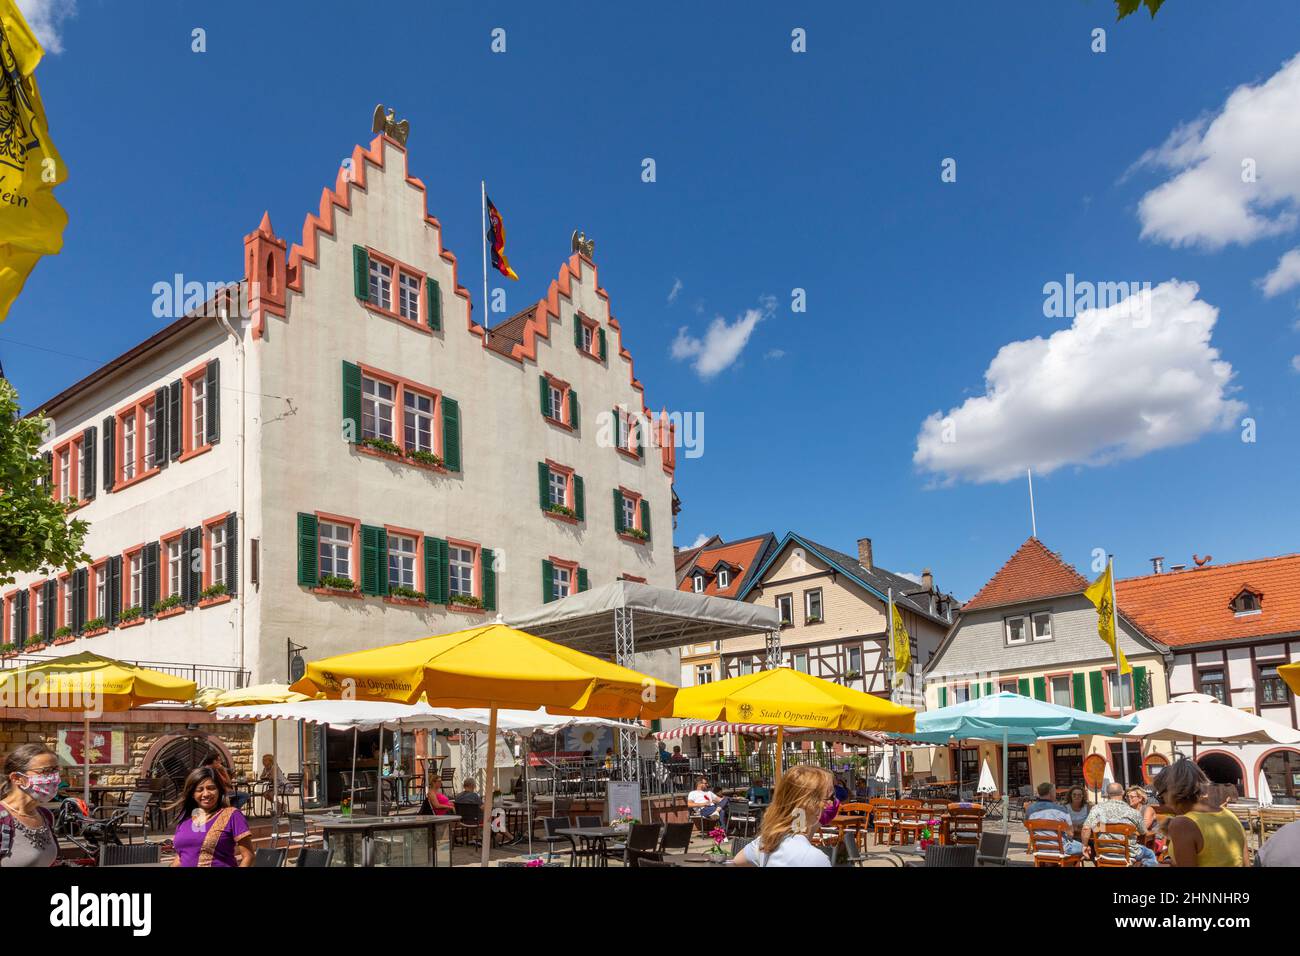 people enjoy a summer day at Market Place of Oppenheim, Germany during the corona season. Stock Photo